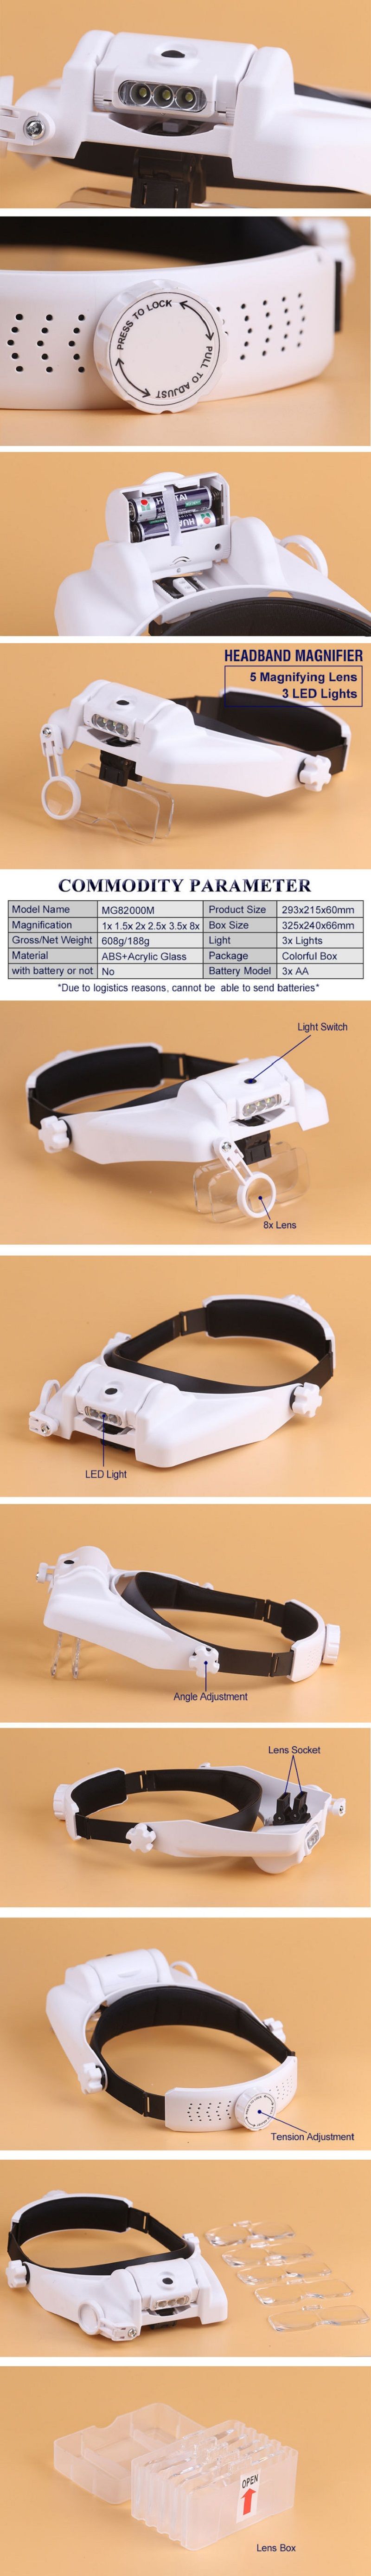 82000M-Headband-Magnifier-Multi-functional-Loupe-Led-Head-Mounted-Magnifying-Glass-With-5-Replaceabl-1700448